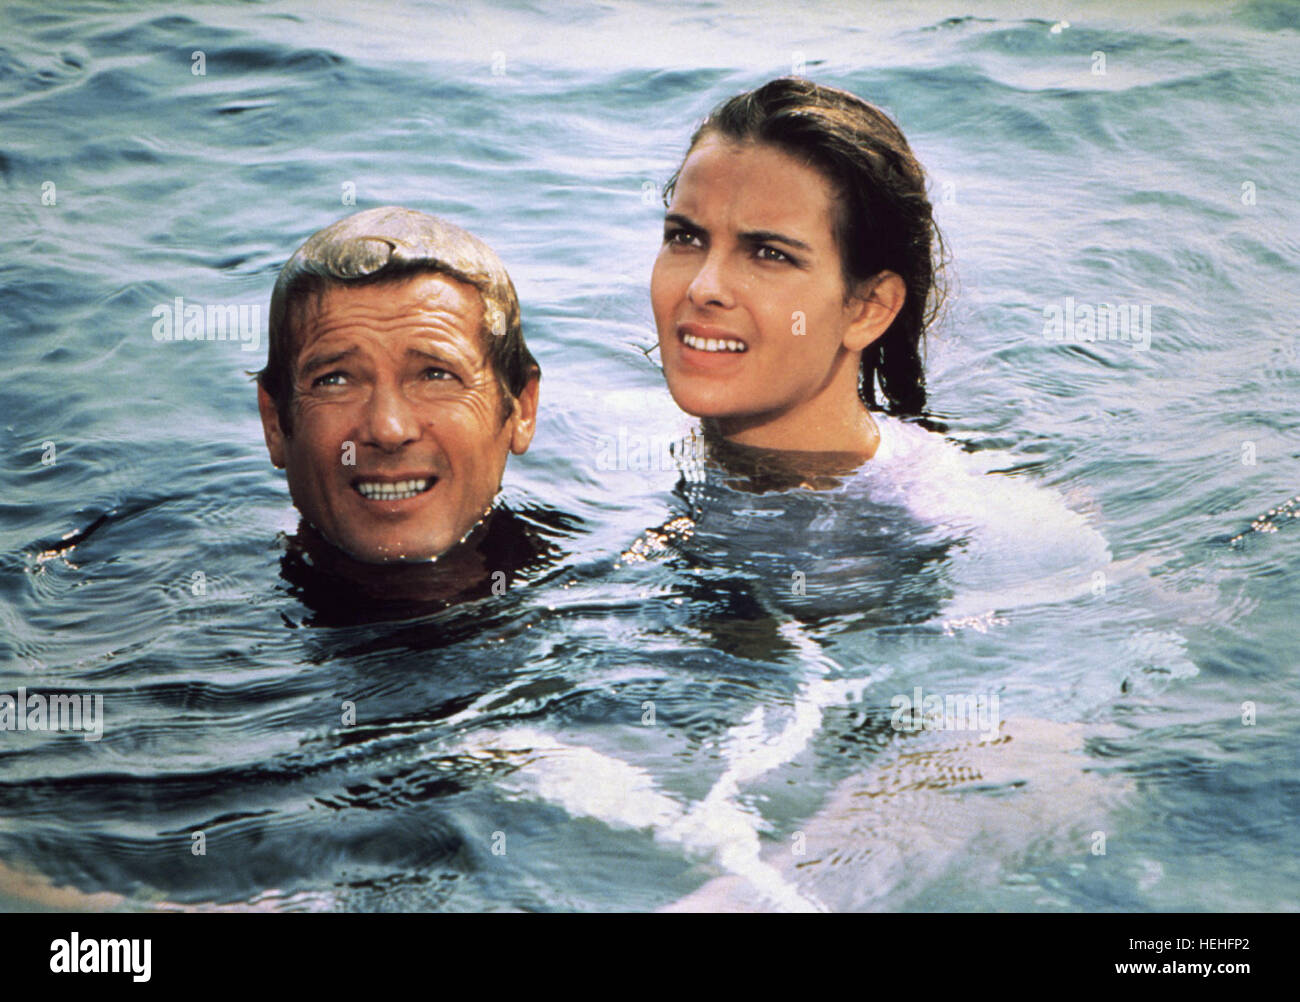 roger-moore-carole-bouquet-james-bond-for-your-eyes-only-1981-HEHFP2.jpg